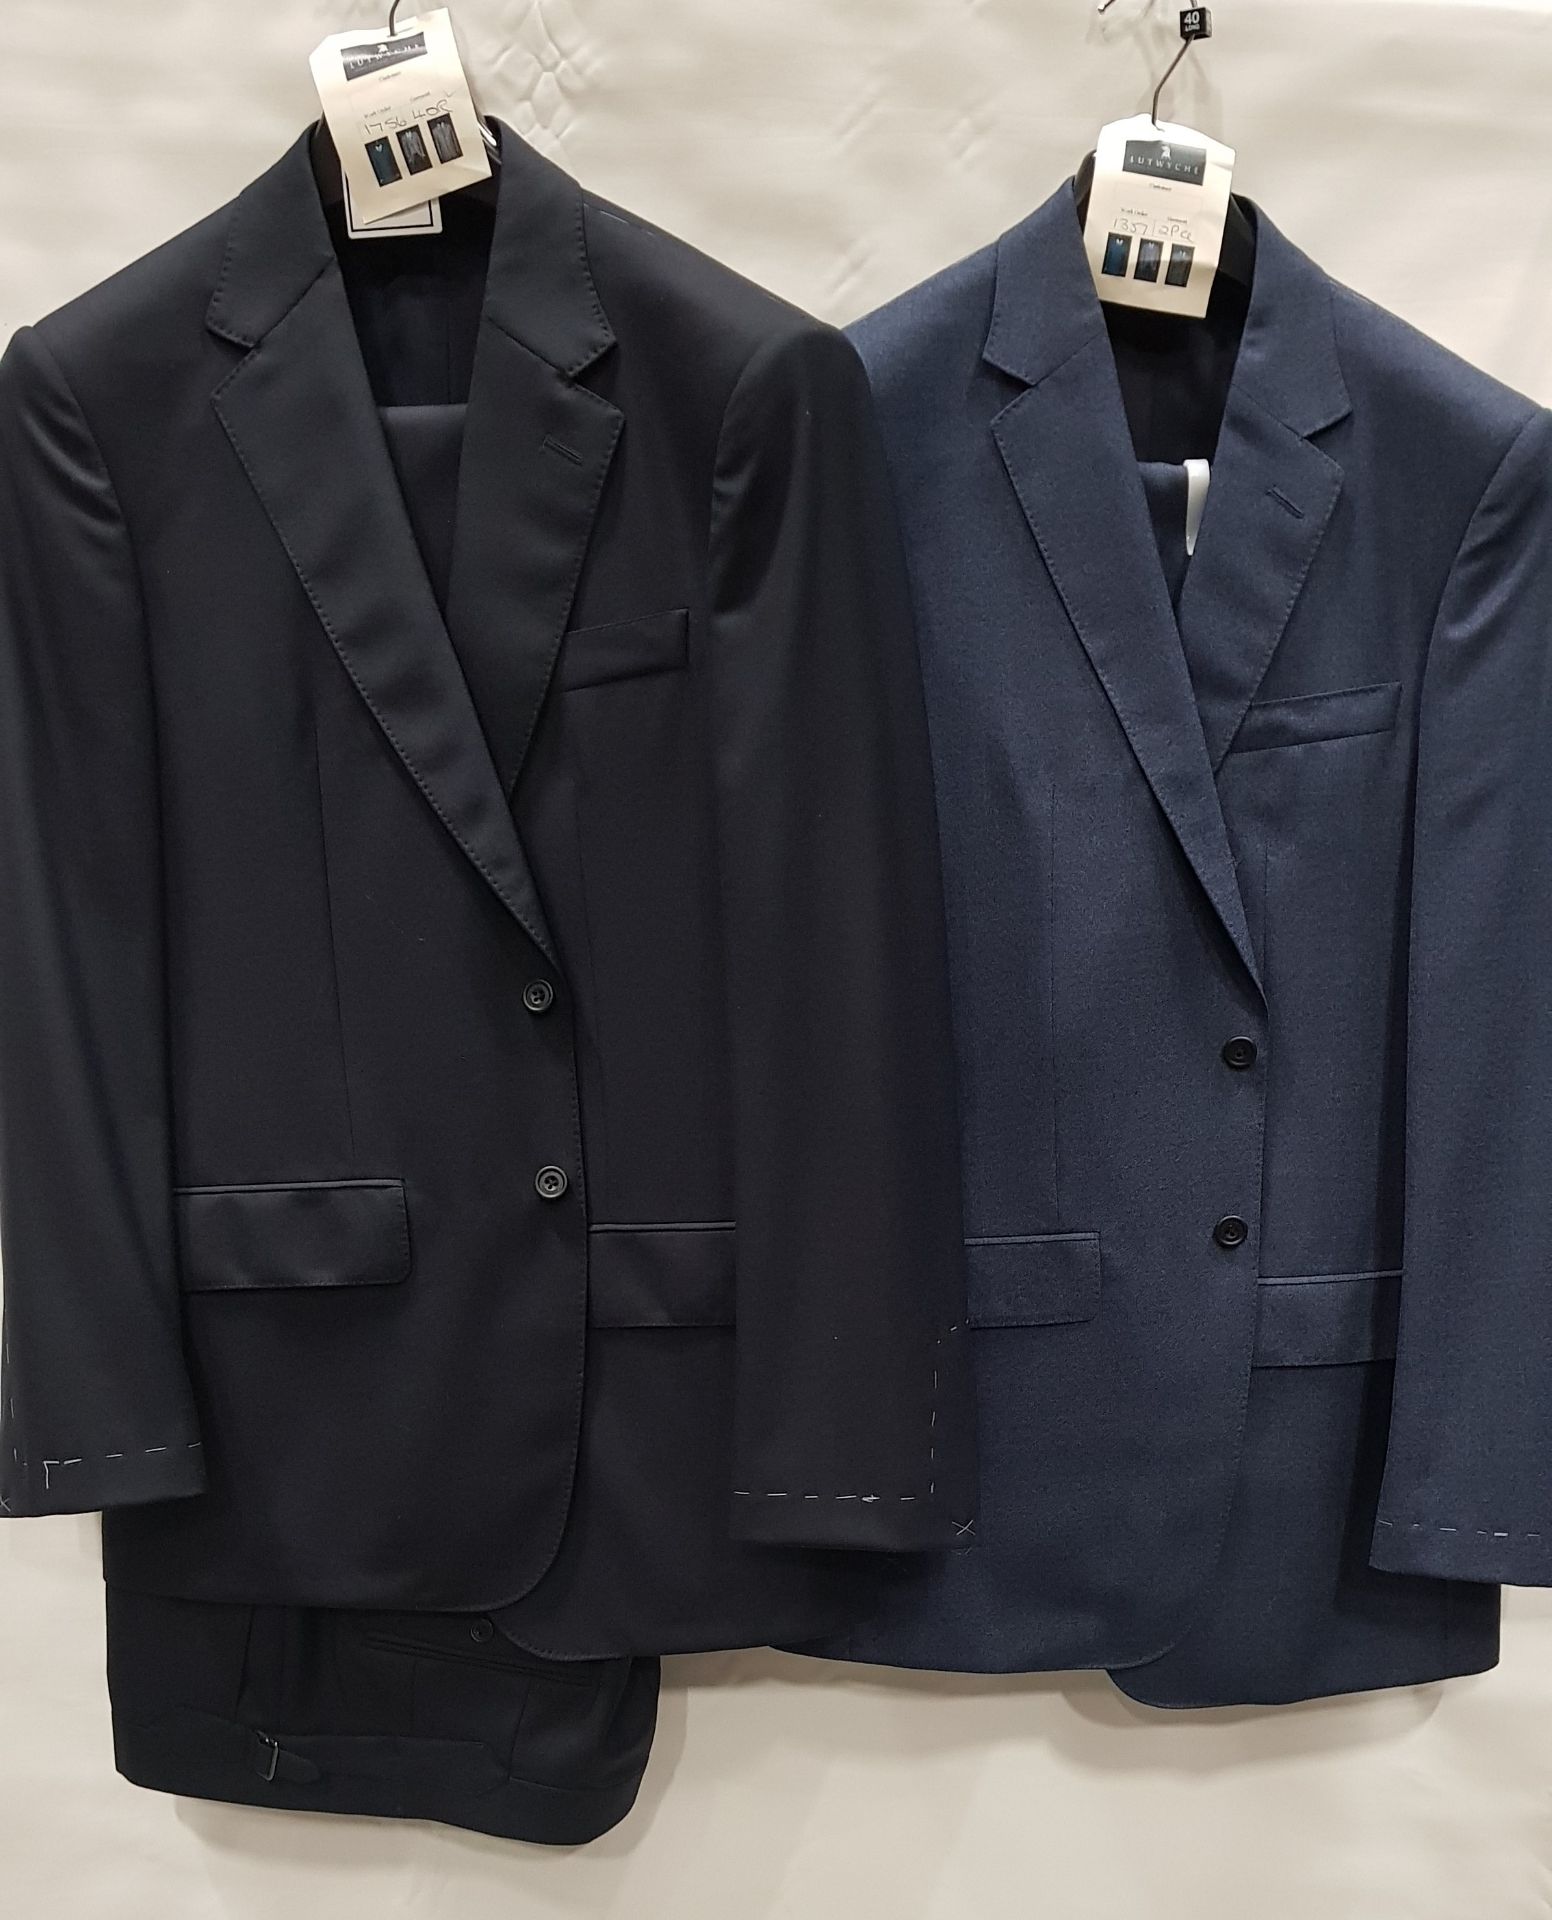 3 X BRAND NEW LUTWYCHE 2 PC DARK BLUE SHADES MATCHING SUITS SIZES 440R, 44R, 40L (NOTE NOT FULLY